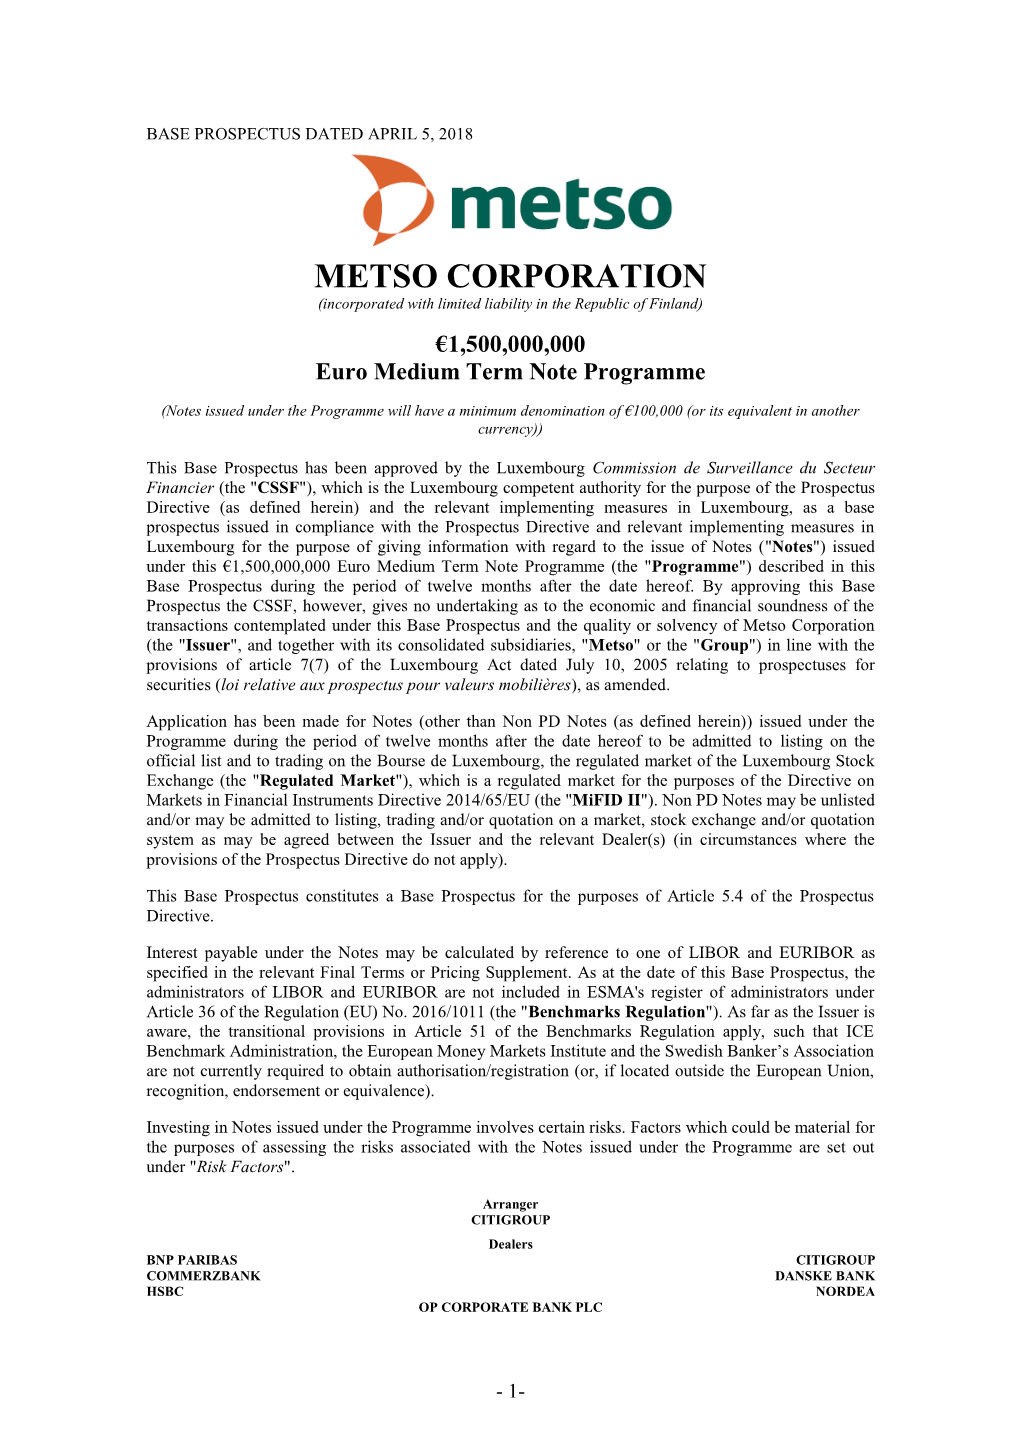 METSO CORPORATION (Incorporated with Limited Liability in the Republic of Finland) €1,500,000,000 Euro Medium Term Note Programme